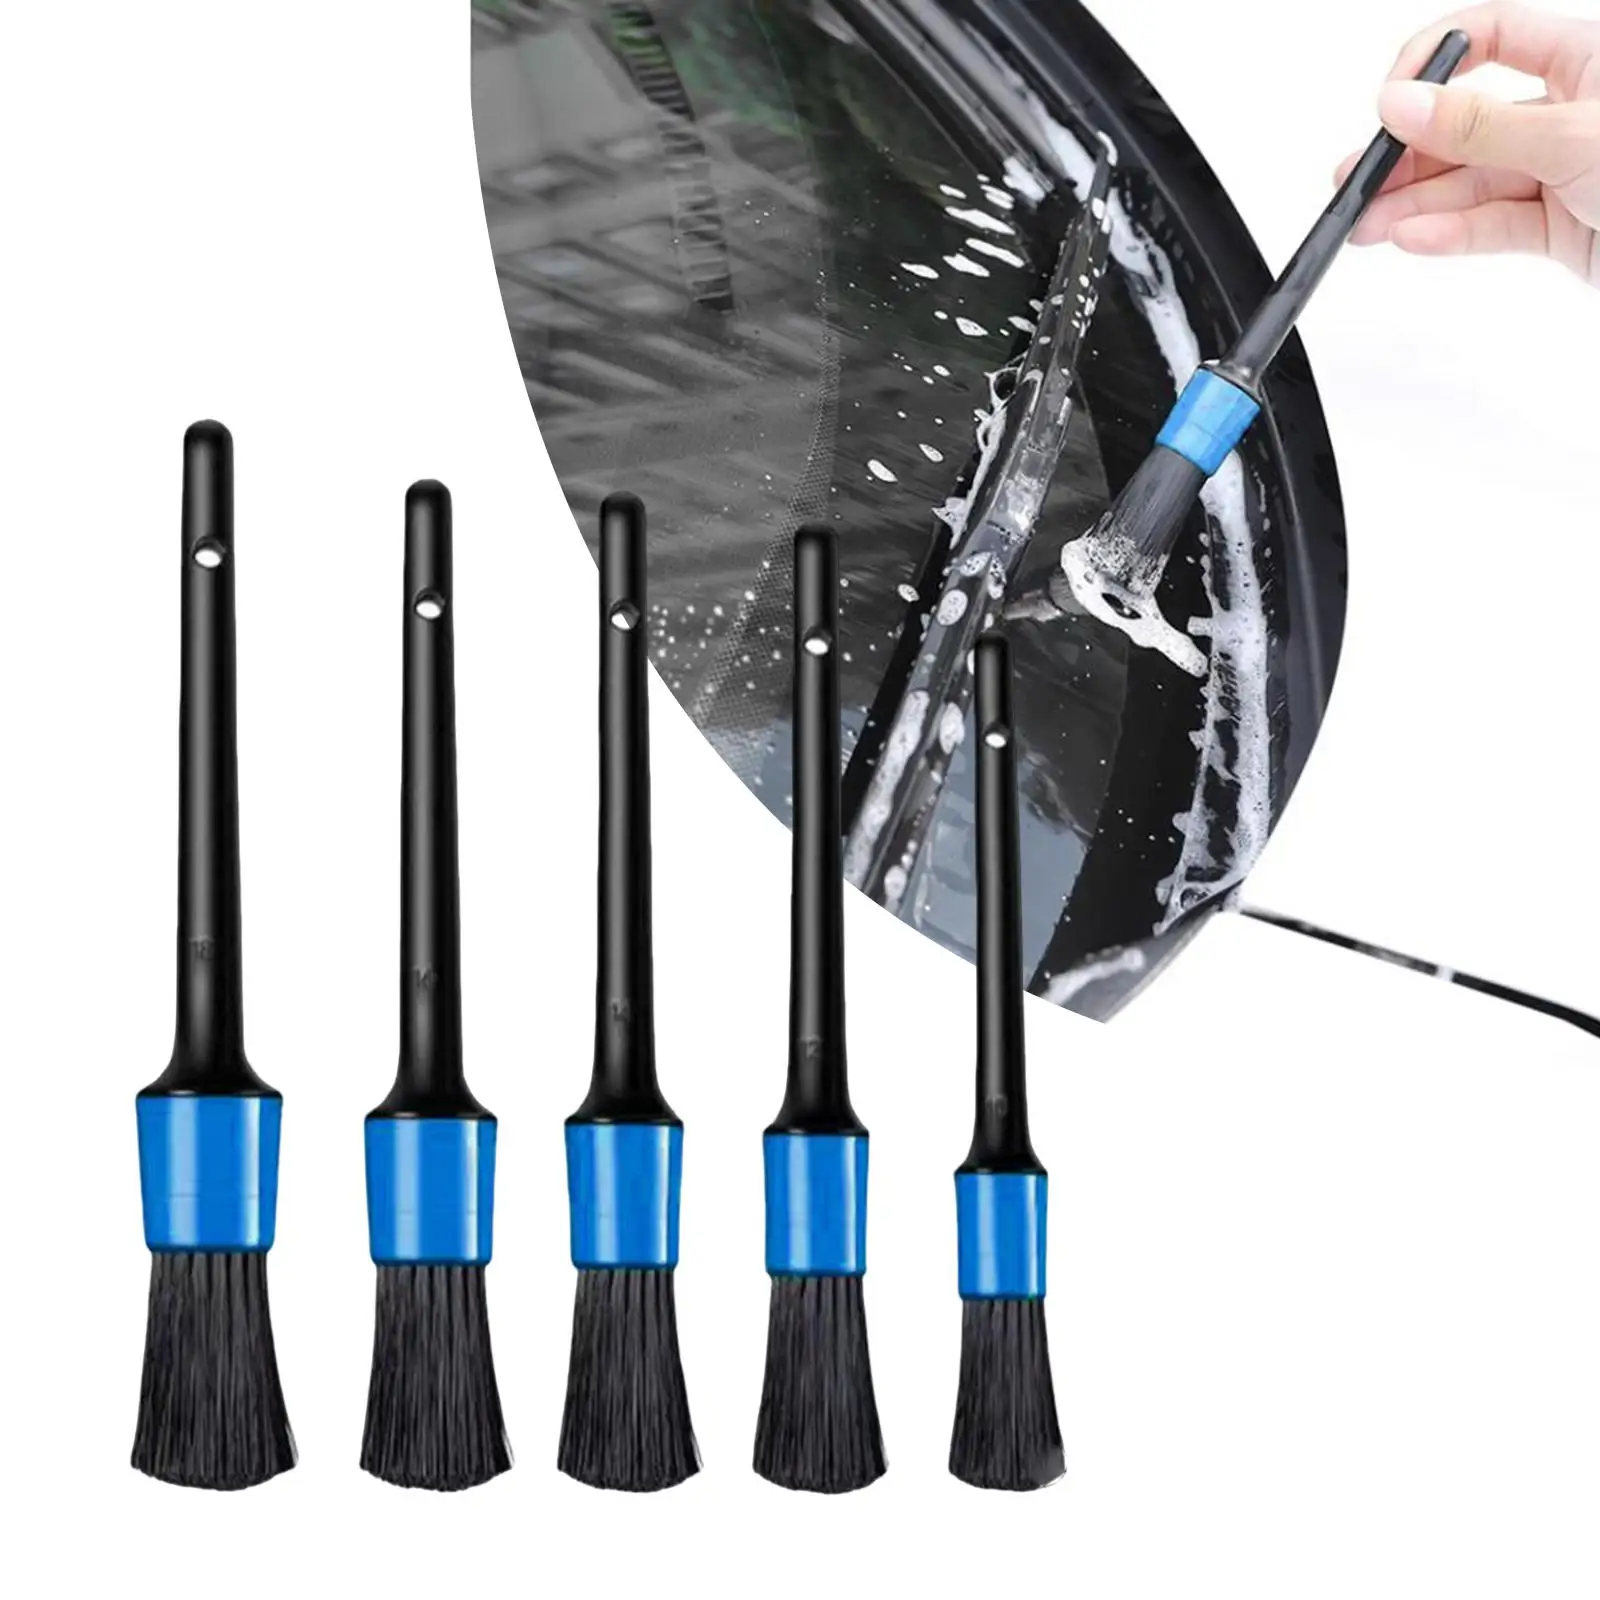 Car Detail Brush Set 5 Sizes Dry and Wet Use with Hanging Hole Convenient for Automotive Interior Exterior Flexible Versatile